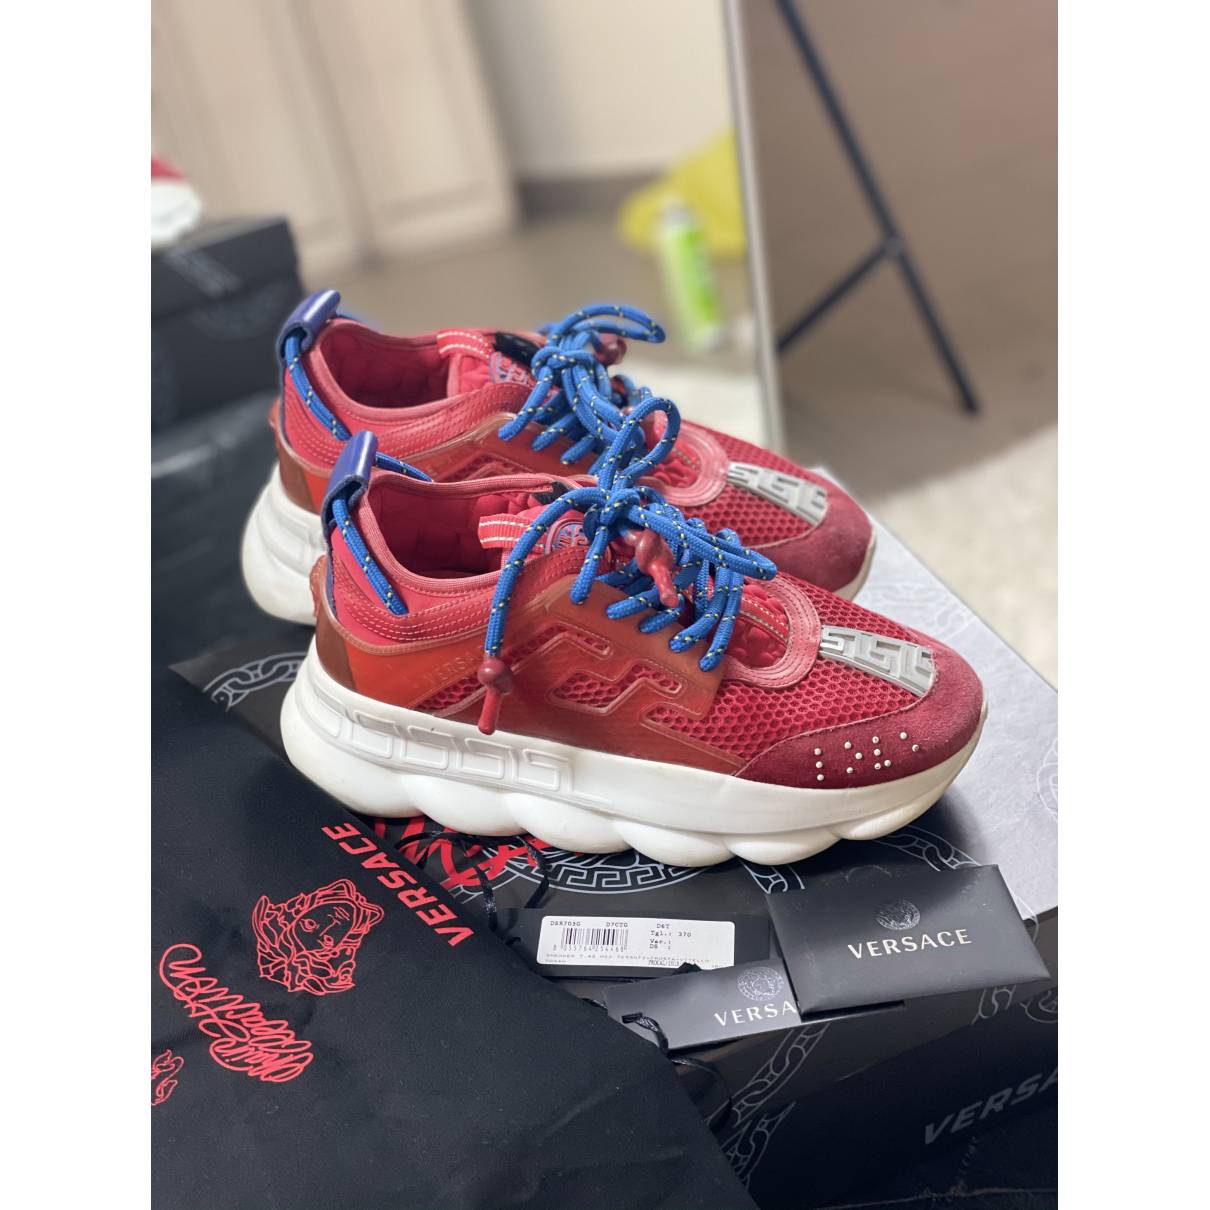 Versace - Authenticated Chain Reaction Trainer - Leather Red for Women, Very Good Condition